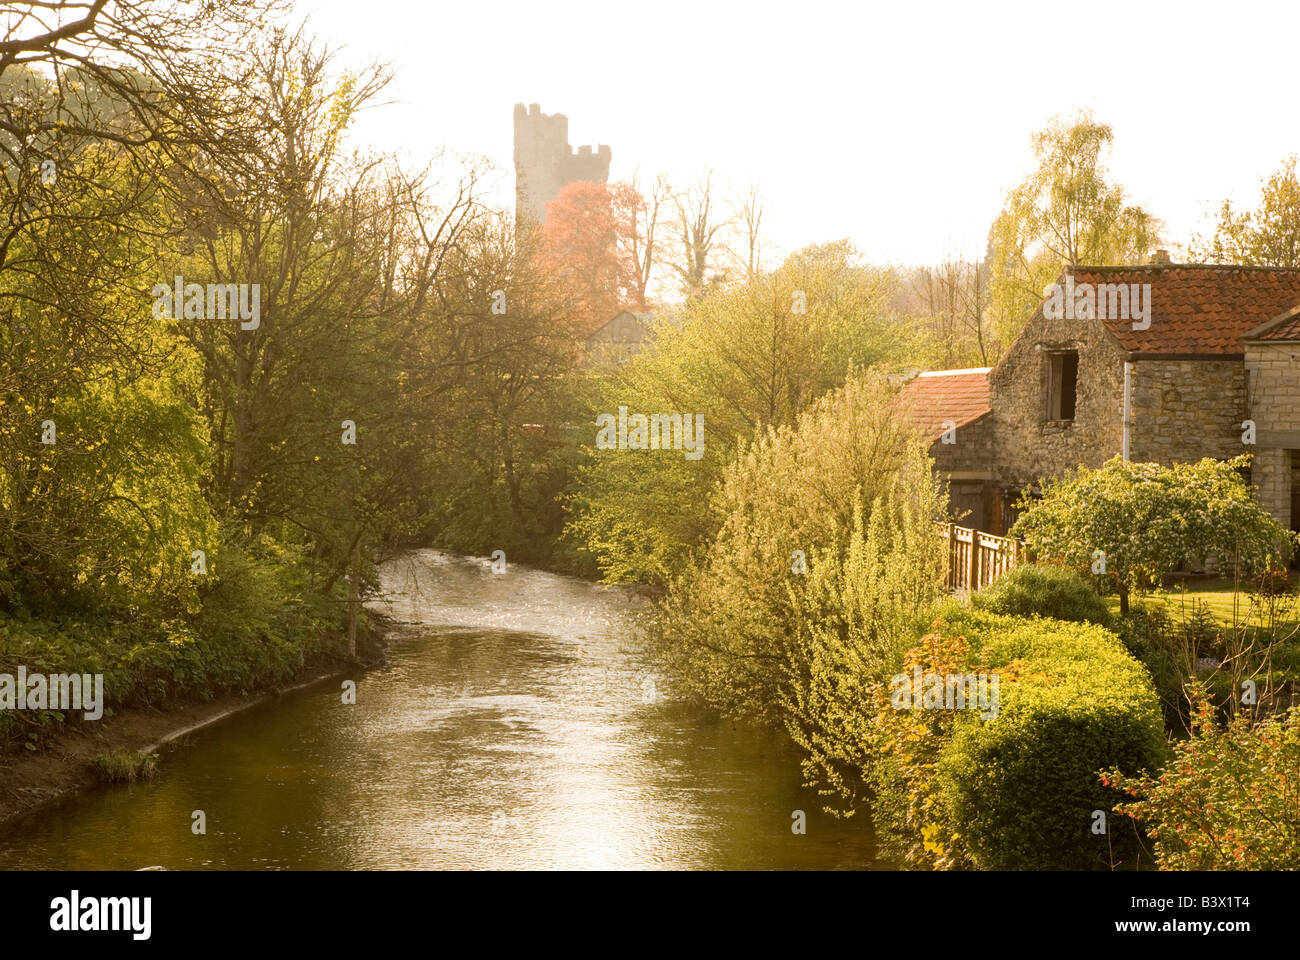 View towards the keep of Helmsley castle from Helmsley bridge Stock Photo